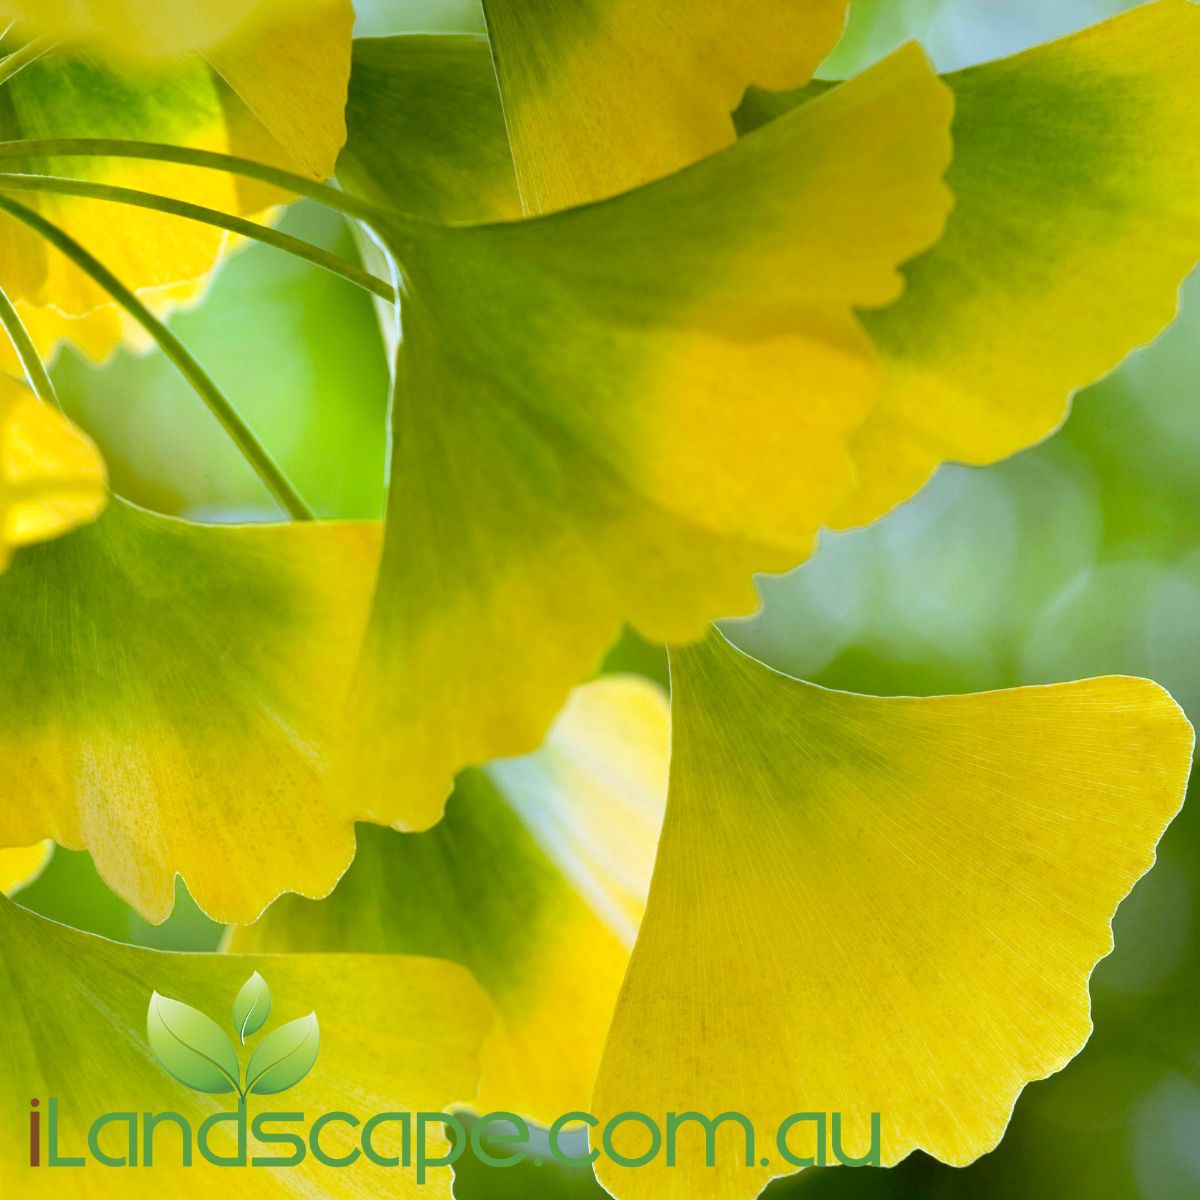 Ginkgo Lemon Lime Spire has a strong vertical growth habit and a delicately creased leaf, this Maidenhair Tree is perfect for courtyard gardens, containers and stylish landscapes. The columnar form is well-suited to formal garden styles but is equally at home in a mixed planting where it provides a contrasting vertical accent.   Rich glowing lemon-yellow autumn colour.